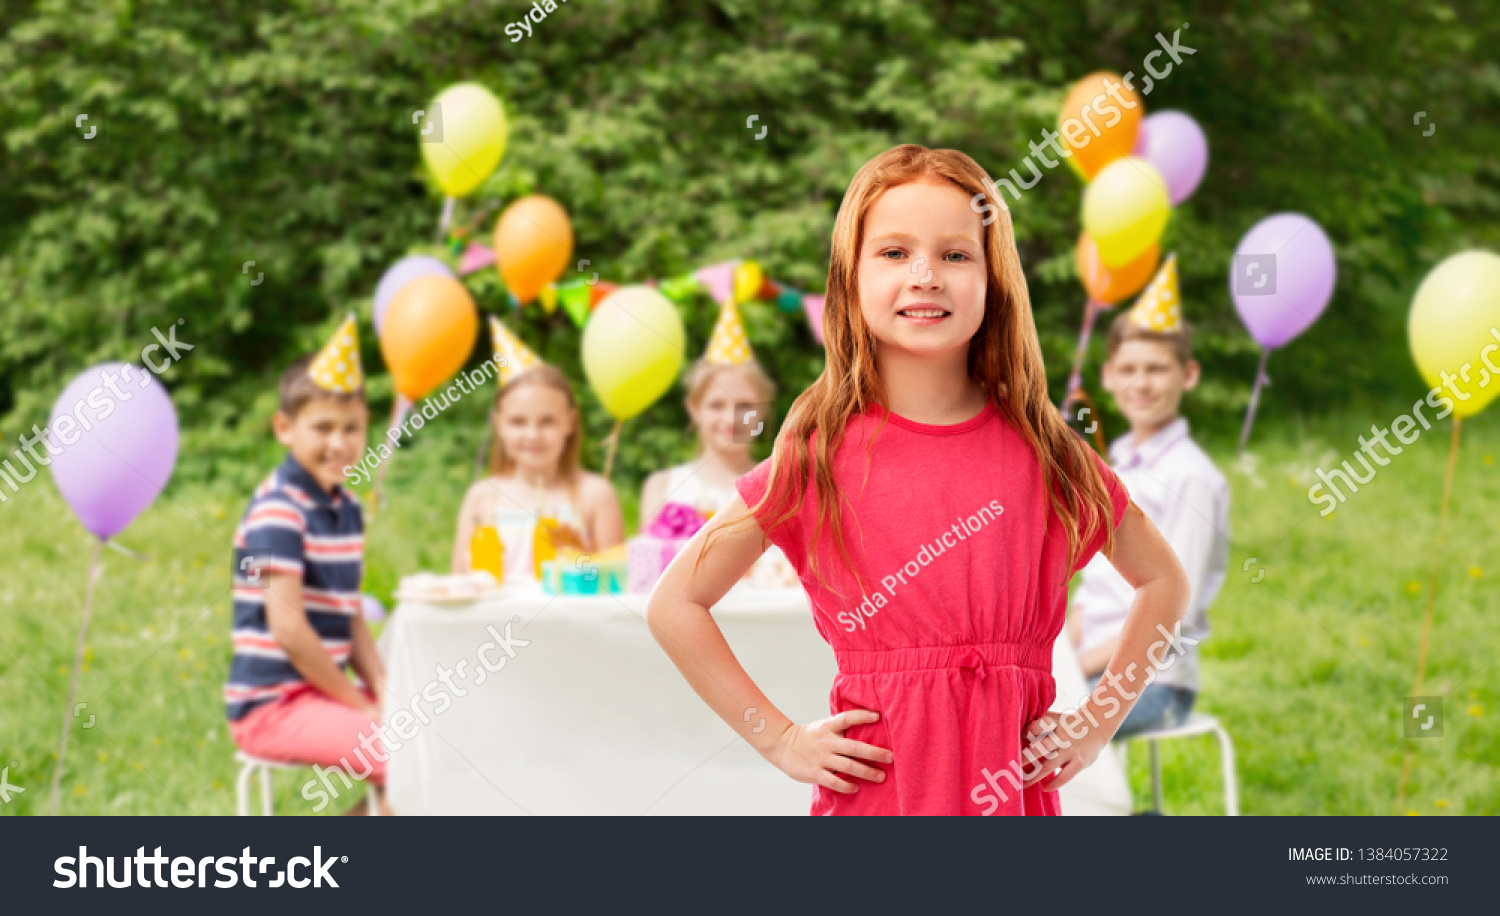 childhood and people concept - smiling red haired girl posing in pink dress over birthday party at summer park background #1384057322